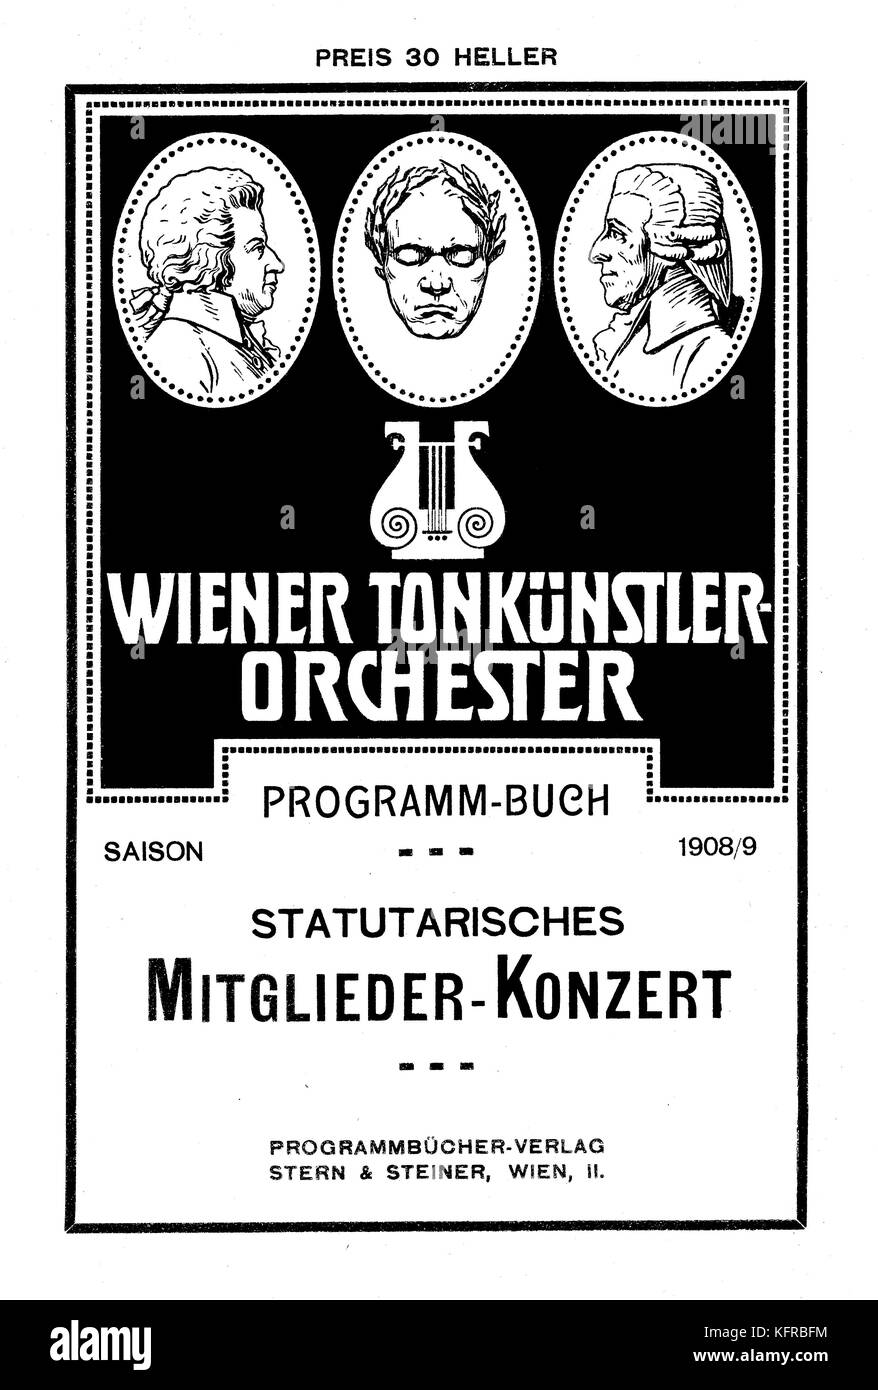 Wiener Tonkünstler - concert programme. Front cover. 1908-09 season.  Austrian orchestral society, founded 1771.  Dissolved in 1933.v Stock Photo